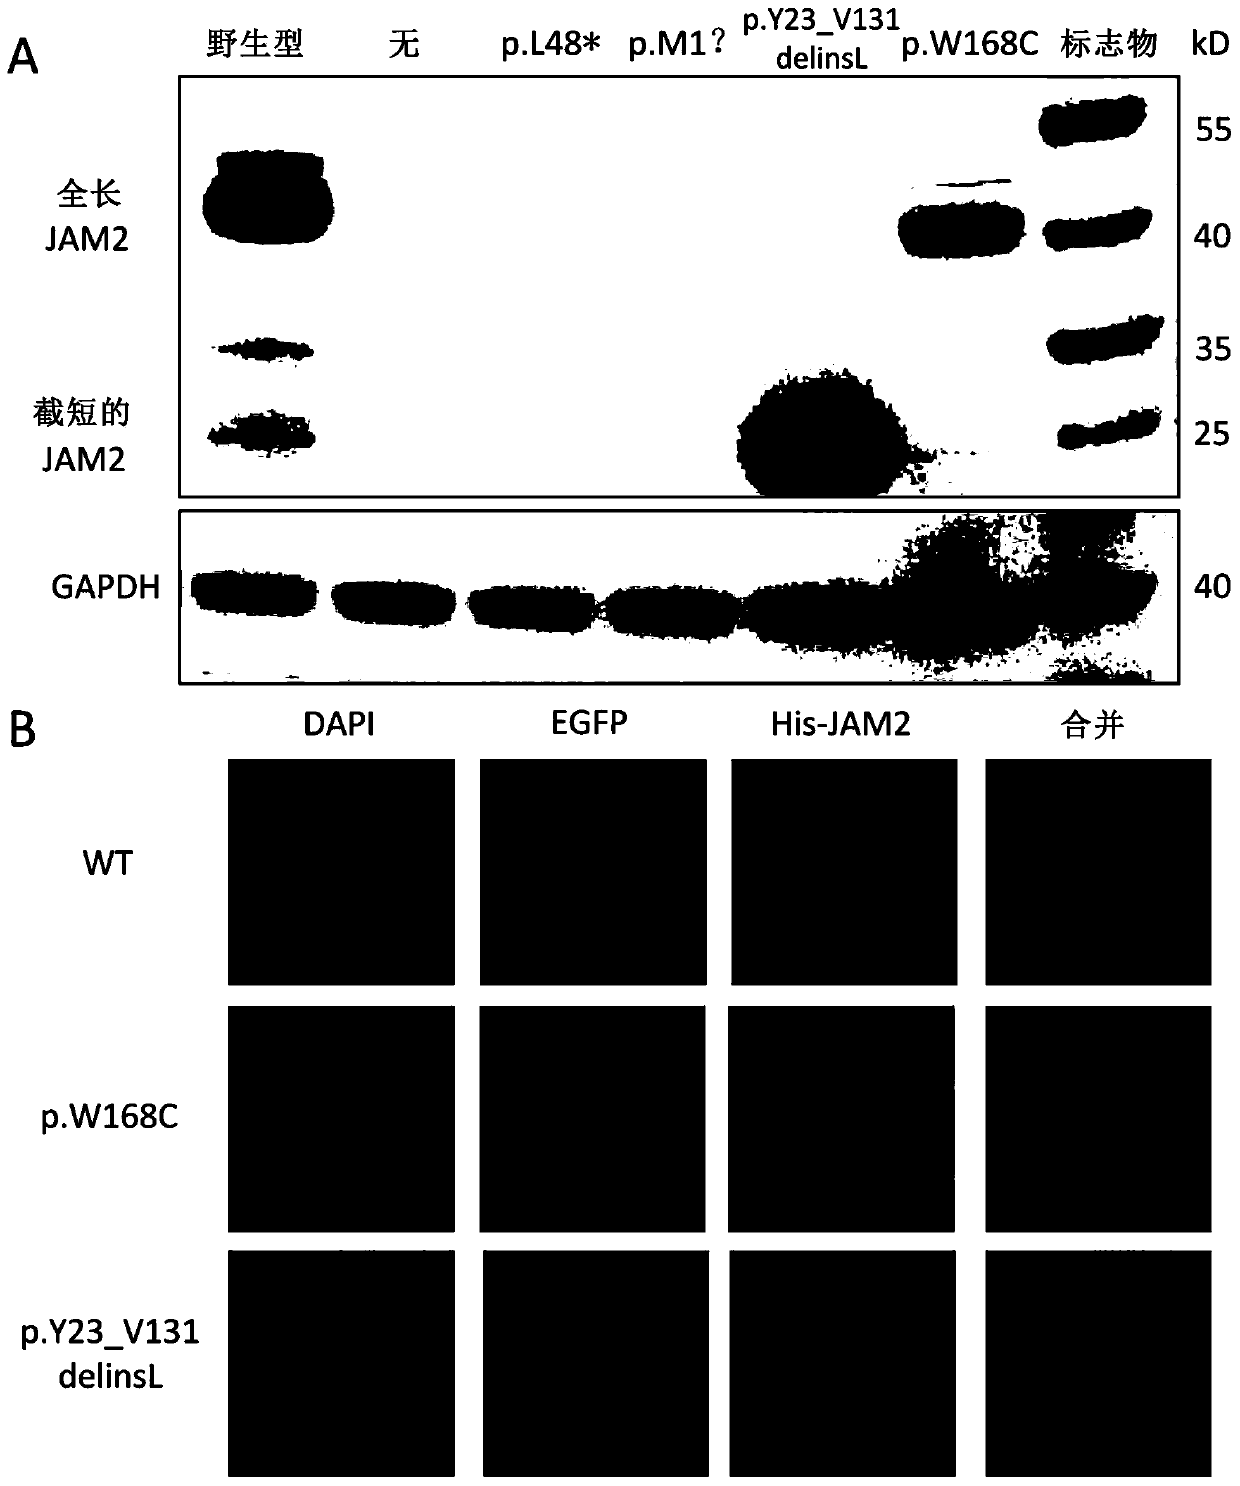 Primary familial brain calcification pathogenic gene JAM2 and application thereof